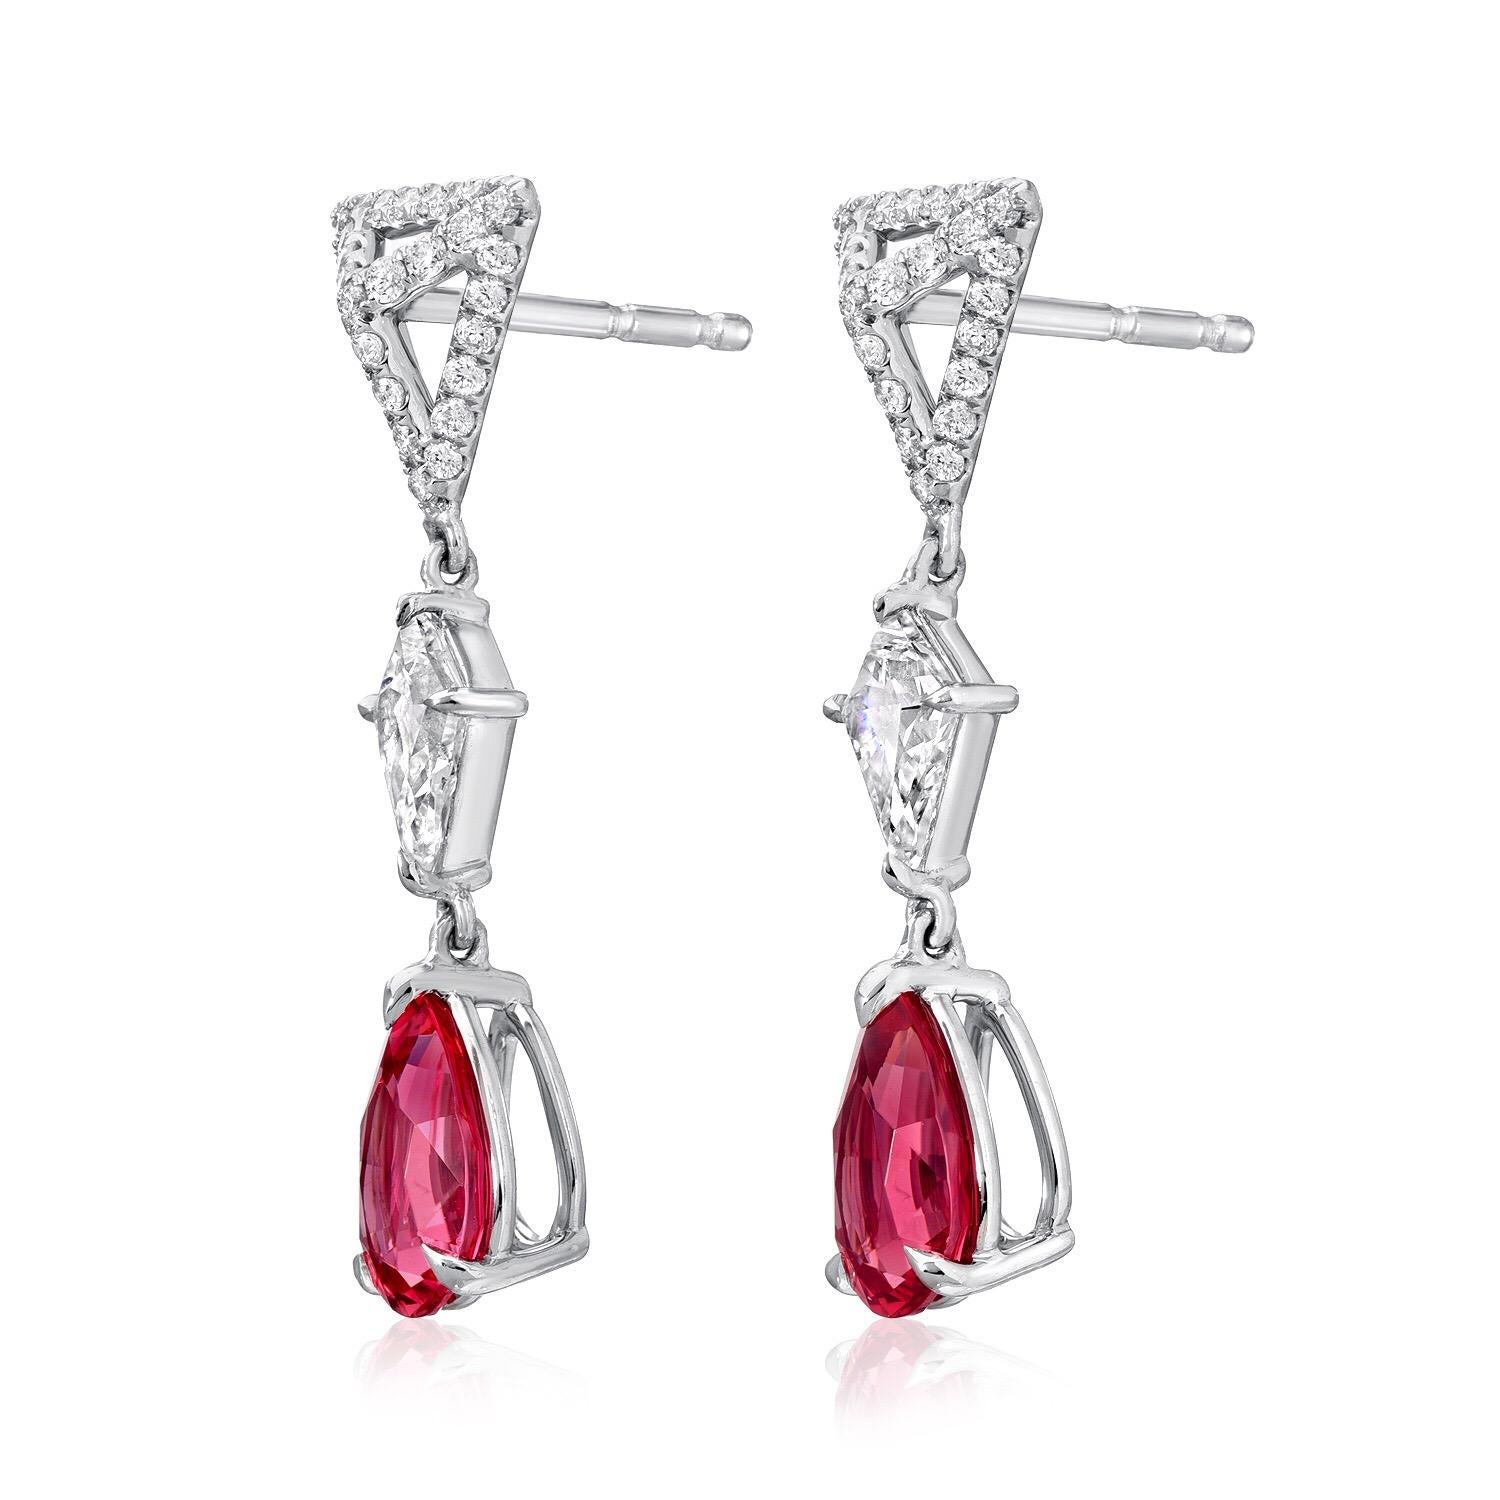 Pink Spinel Earrings 1.83 Carat Pear Shapes For Sale at 1stDibs ...